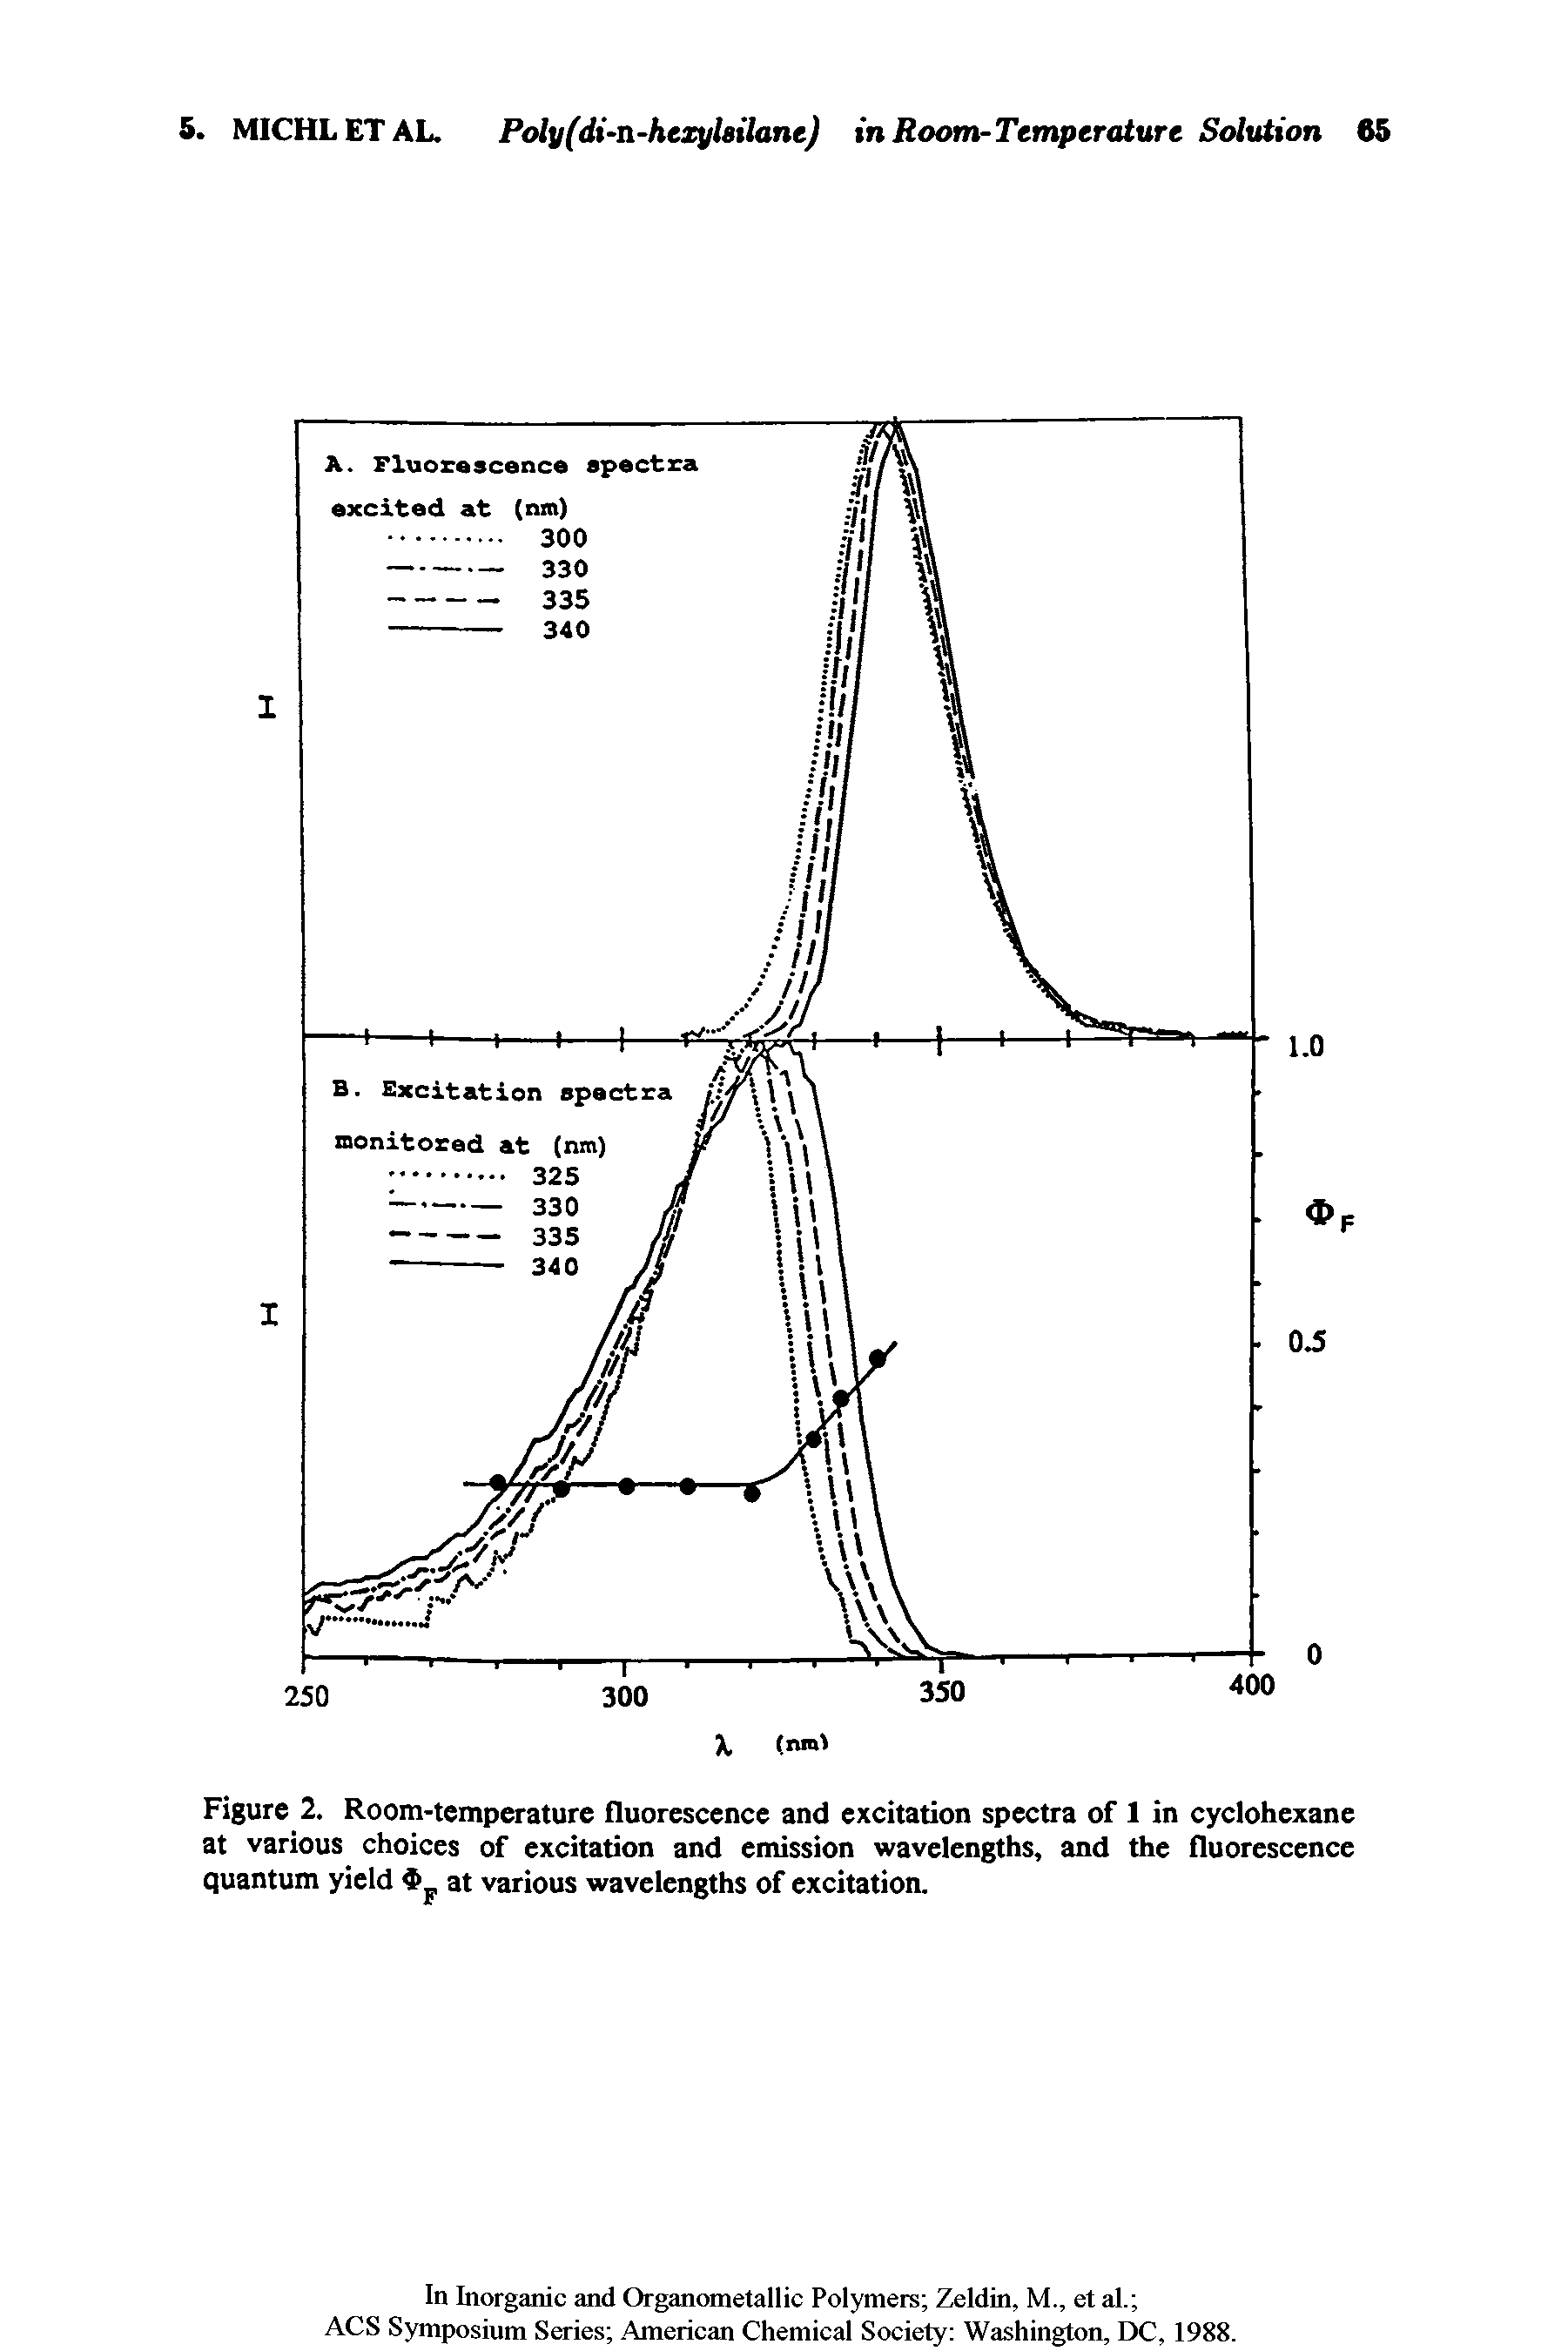 Figure 2. Room-temperature fluorescence and excitation spectra of 1 in cyclohexane at various choices of excitation and emission wavelengths, and the fluorescence quantum yield at various wavelengths of excitation.